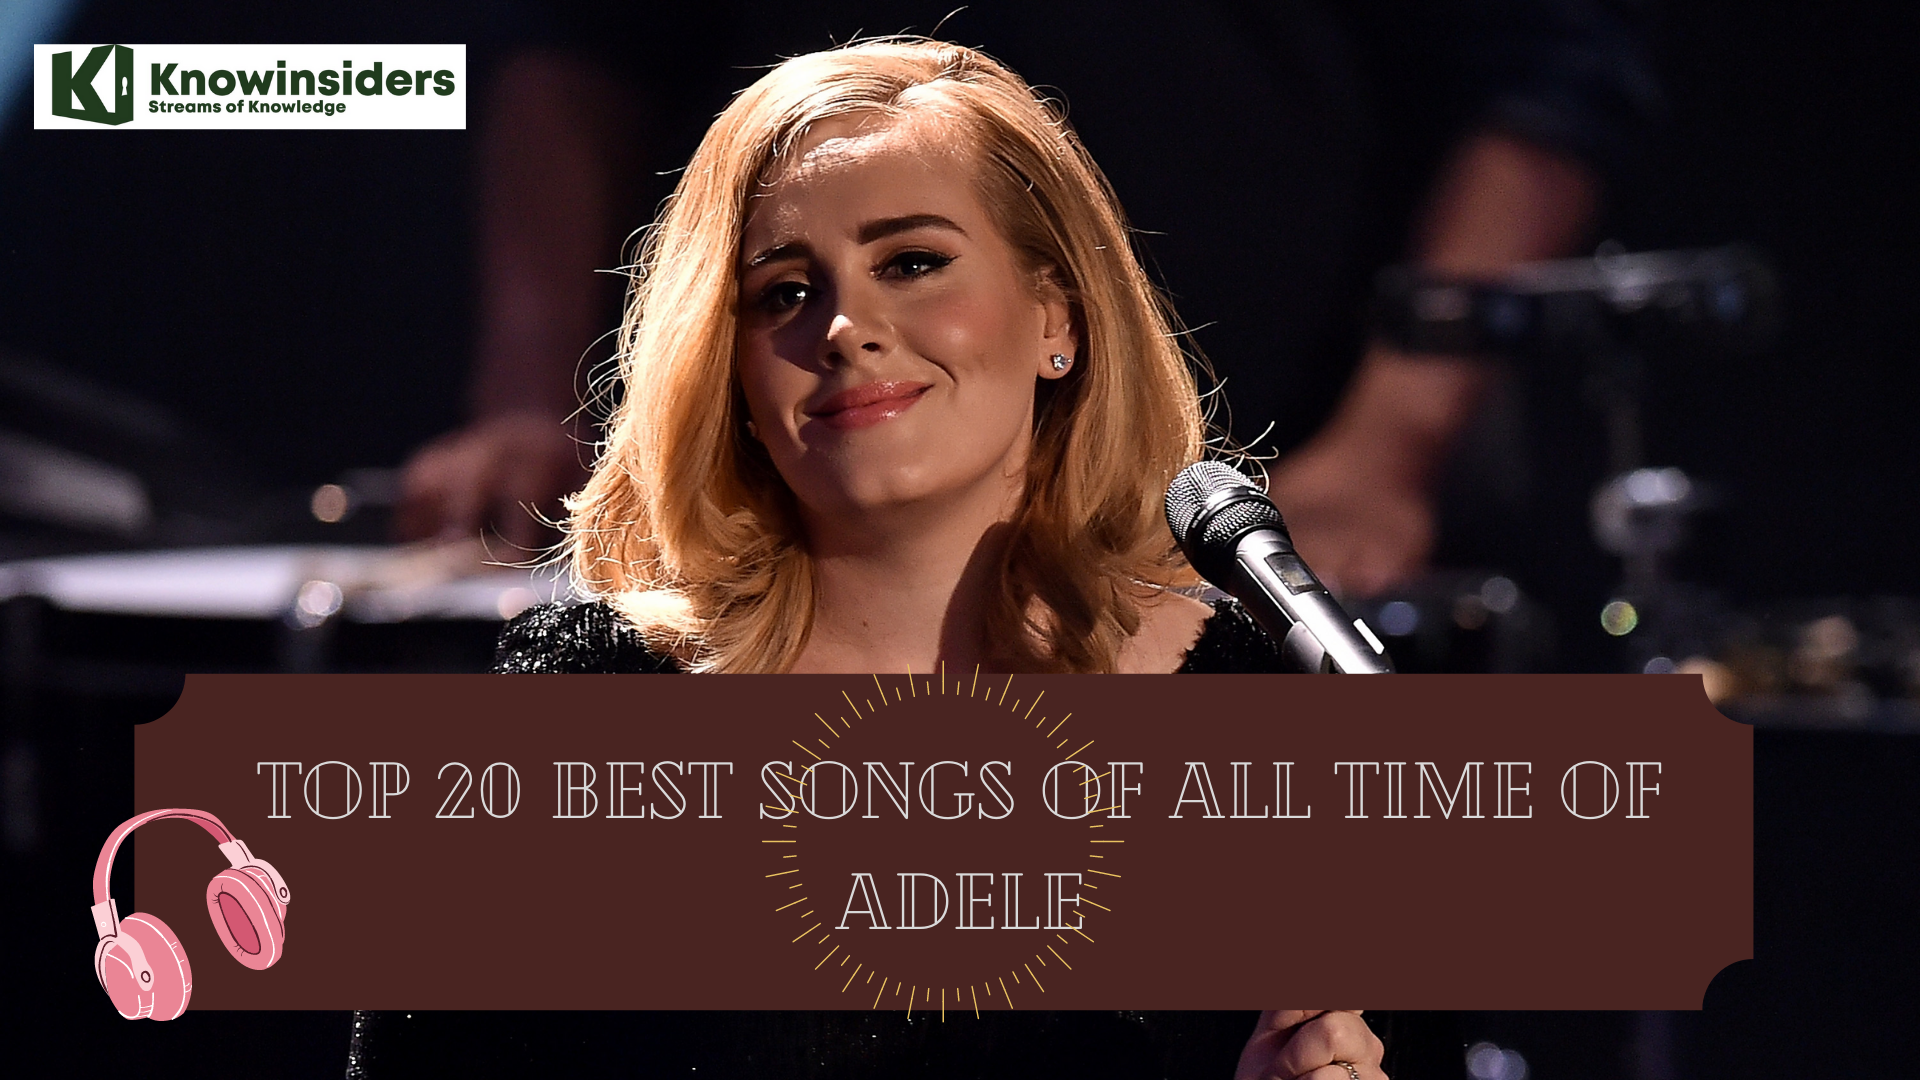 Adele - Top 20 Best Songs Of All Time